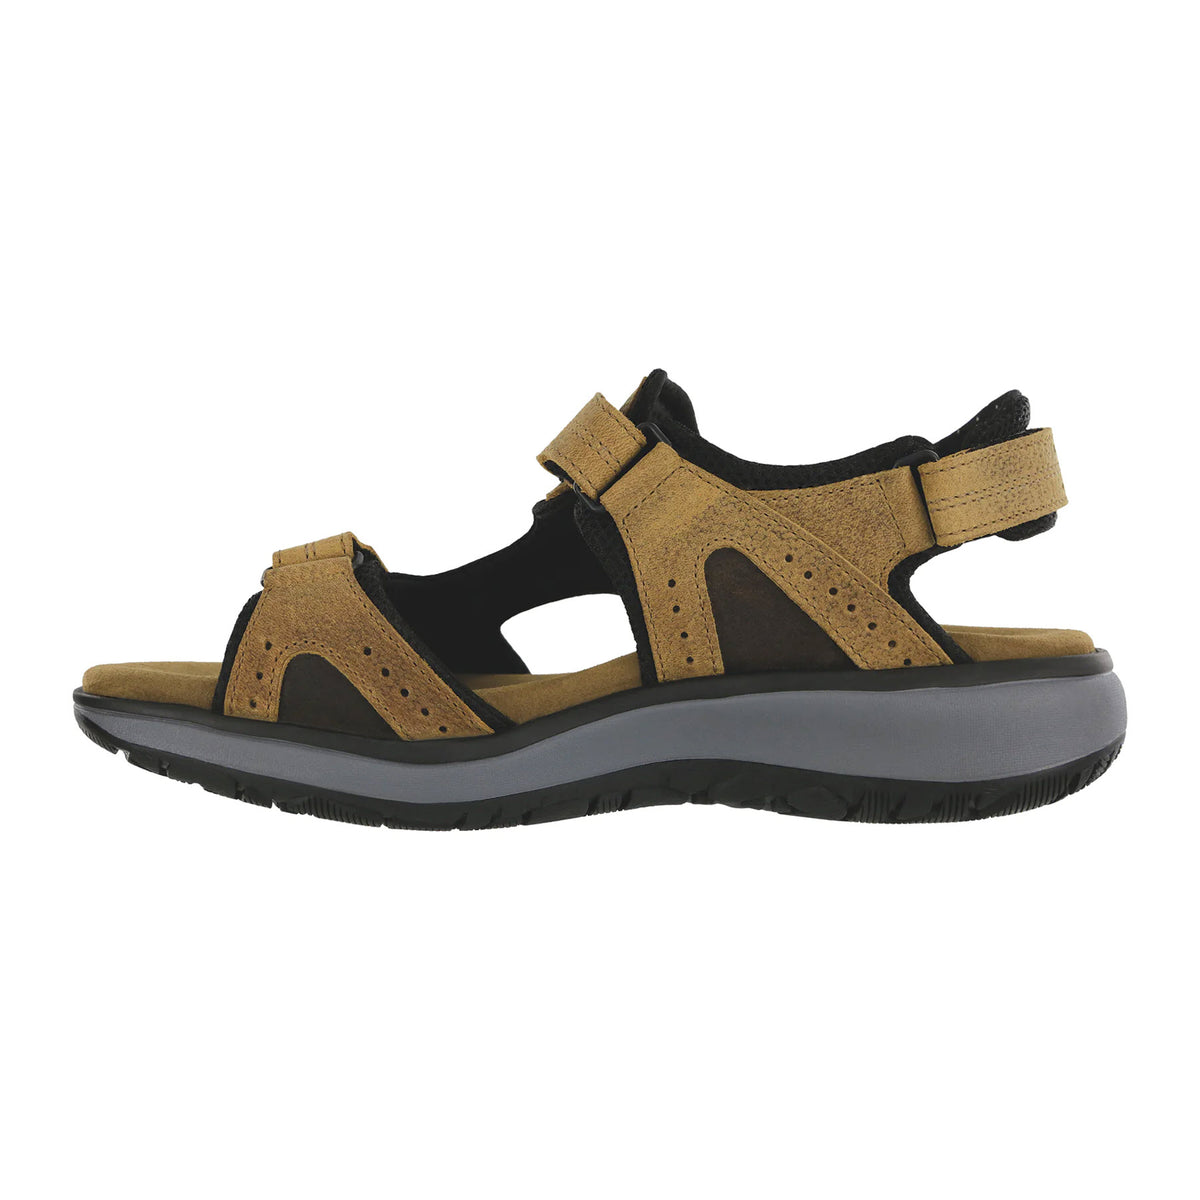 A side view of a brown and black SAS Maverick Sandal Stampede Sand - Mens with adjustable straps and a cushioned sole.